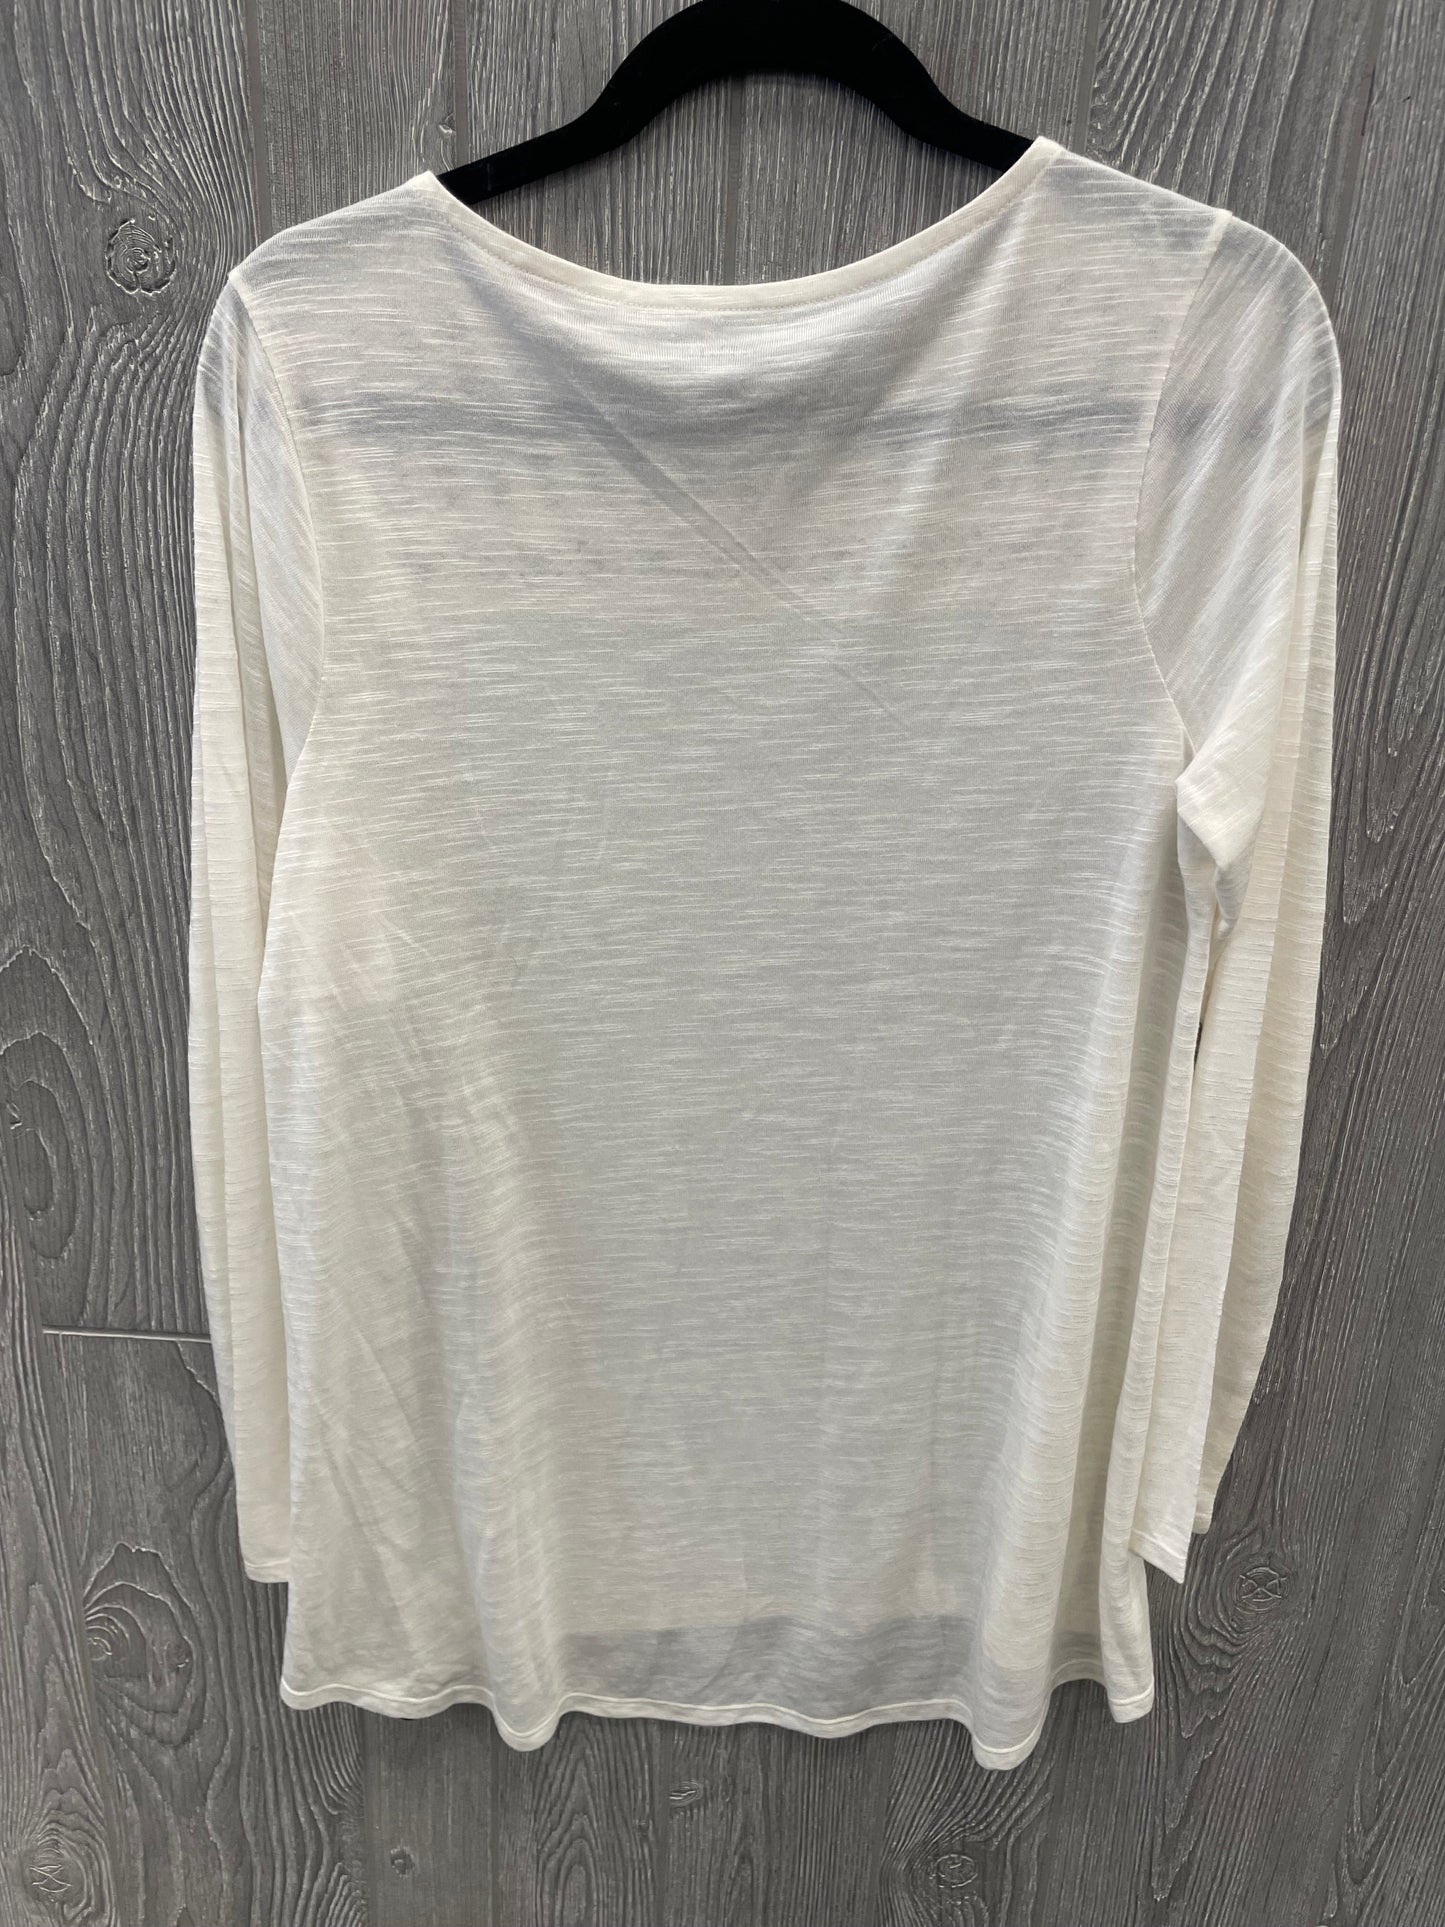 White Top Long Sleeve Ana, Size L